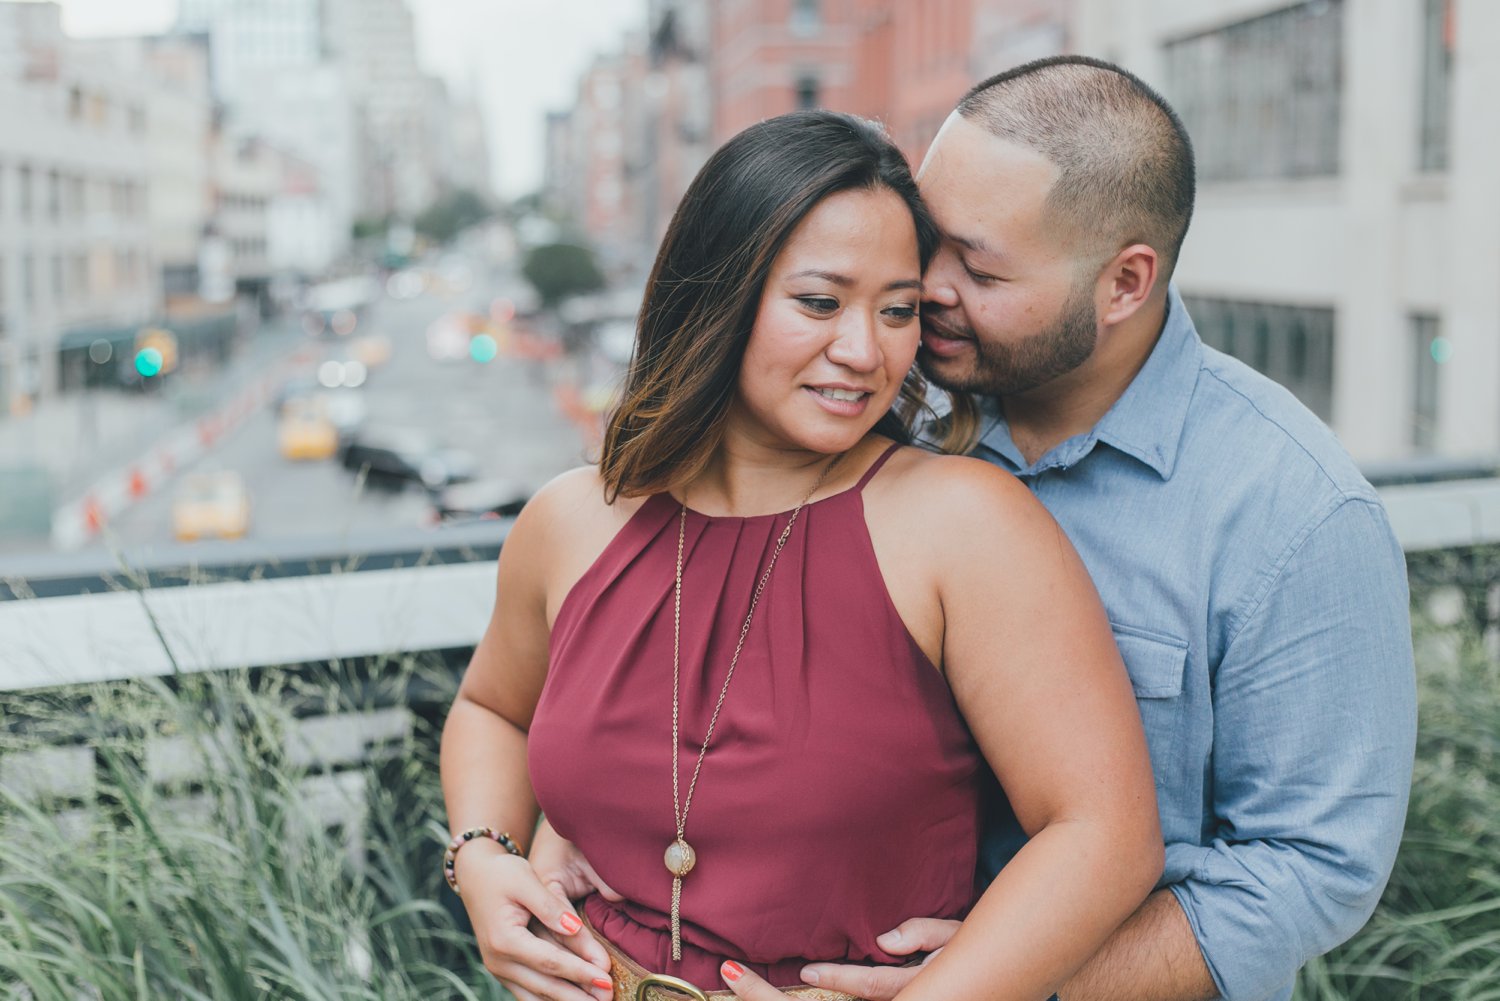 83NYC-NJ-ENGAGEMENT-PHOTOGRAPHY-BY-INTOTHESTORY-MOO-JAE.JPG